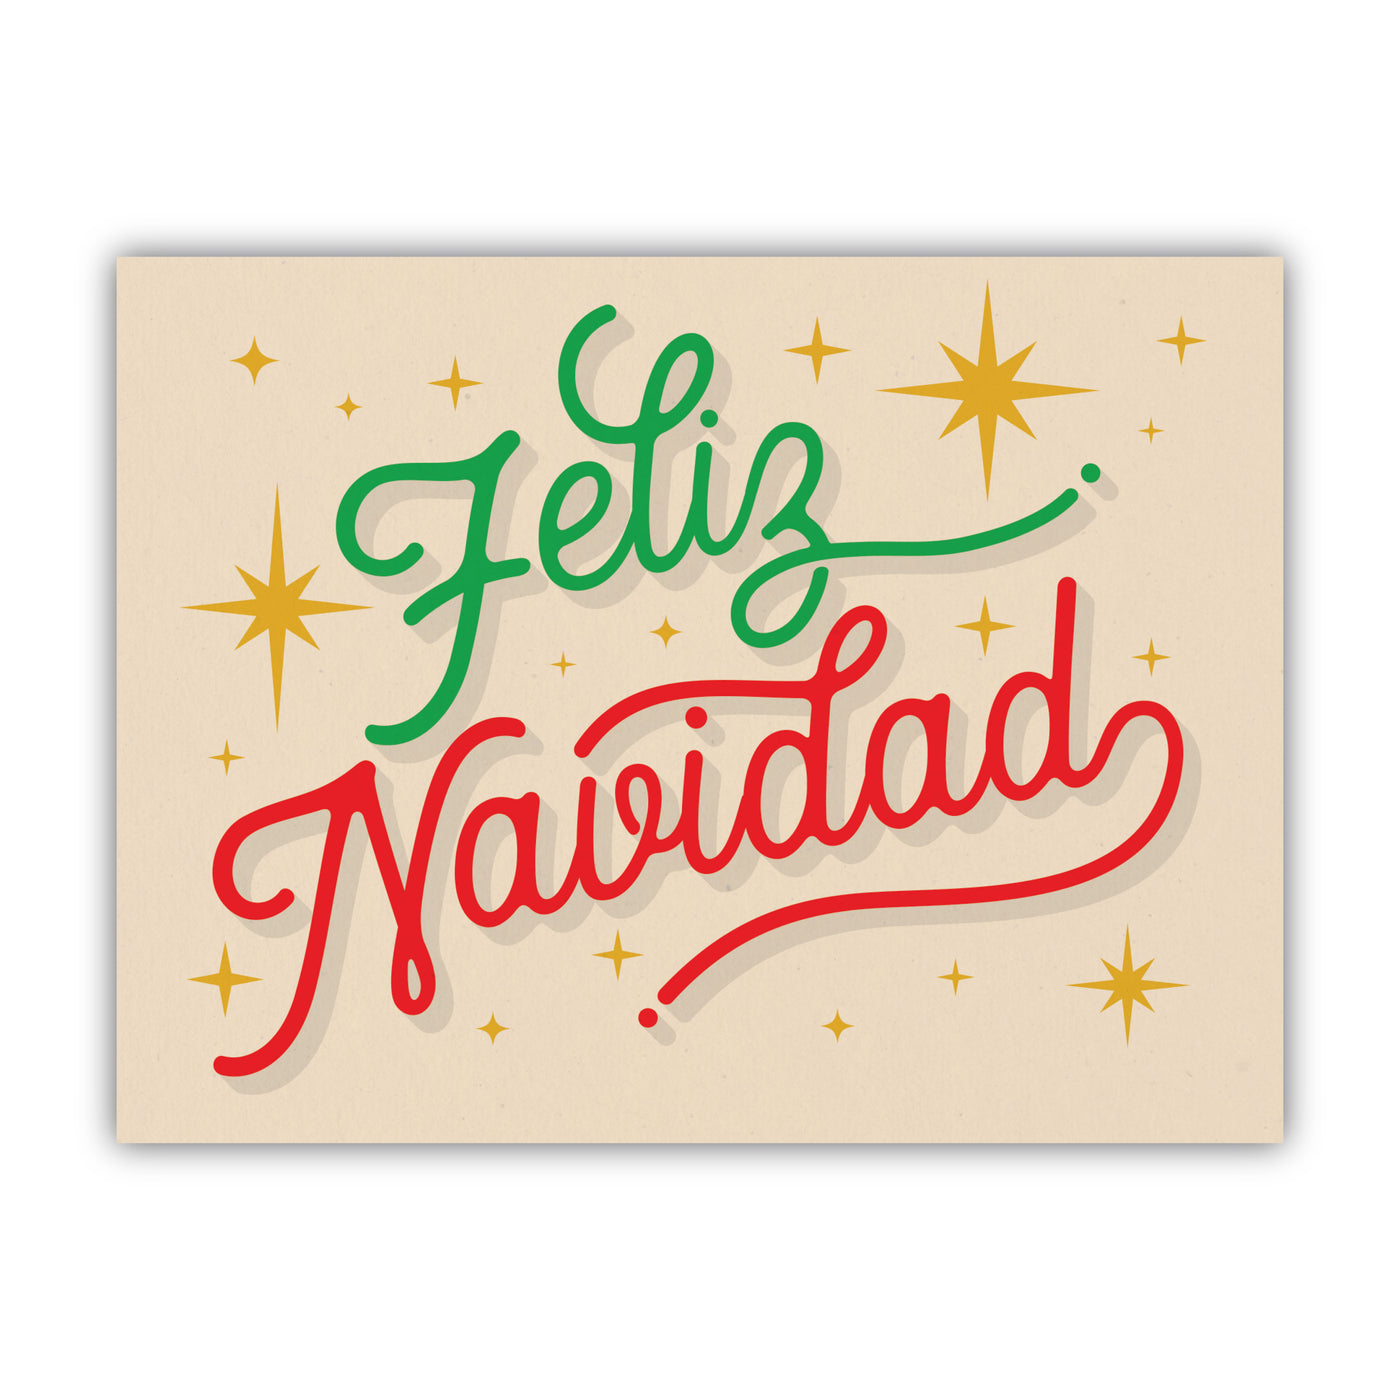 Front of greeting card with beige background, gold stars, red & green text that reads "Feliz Navidad"